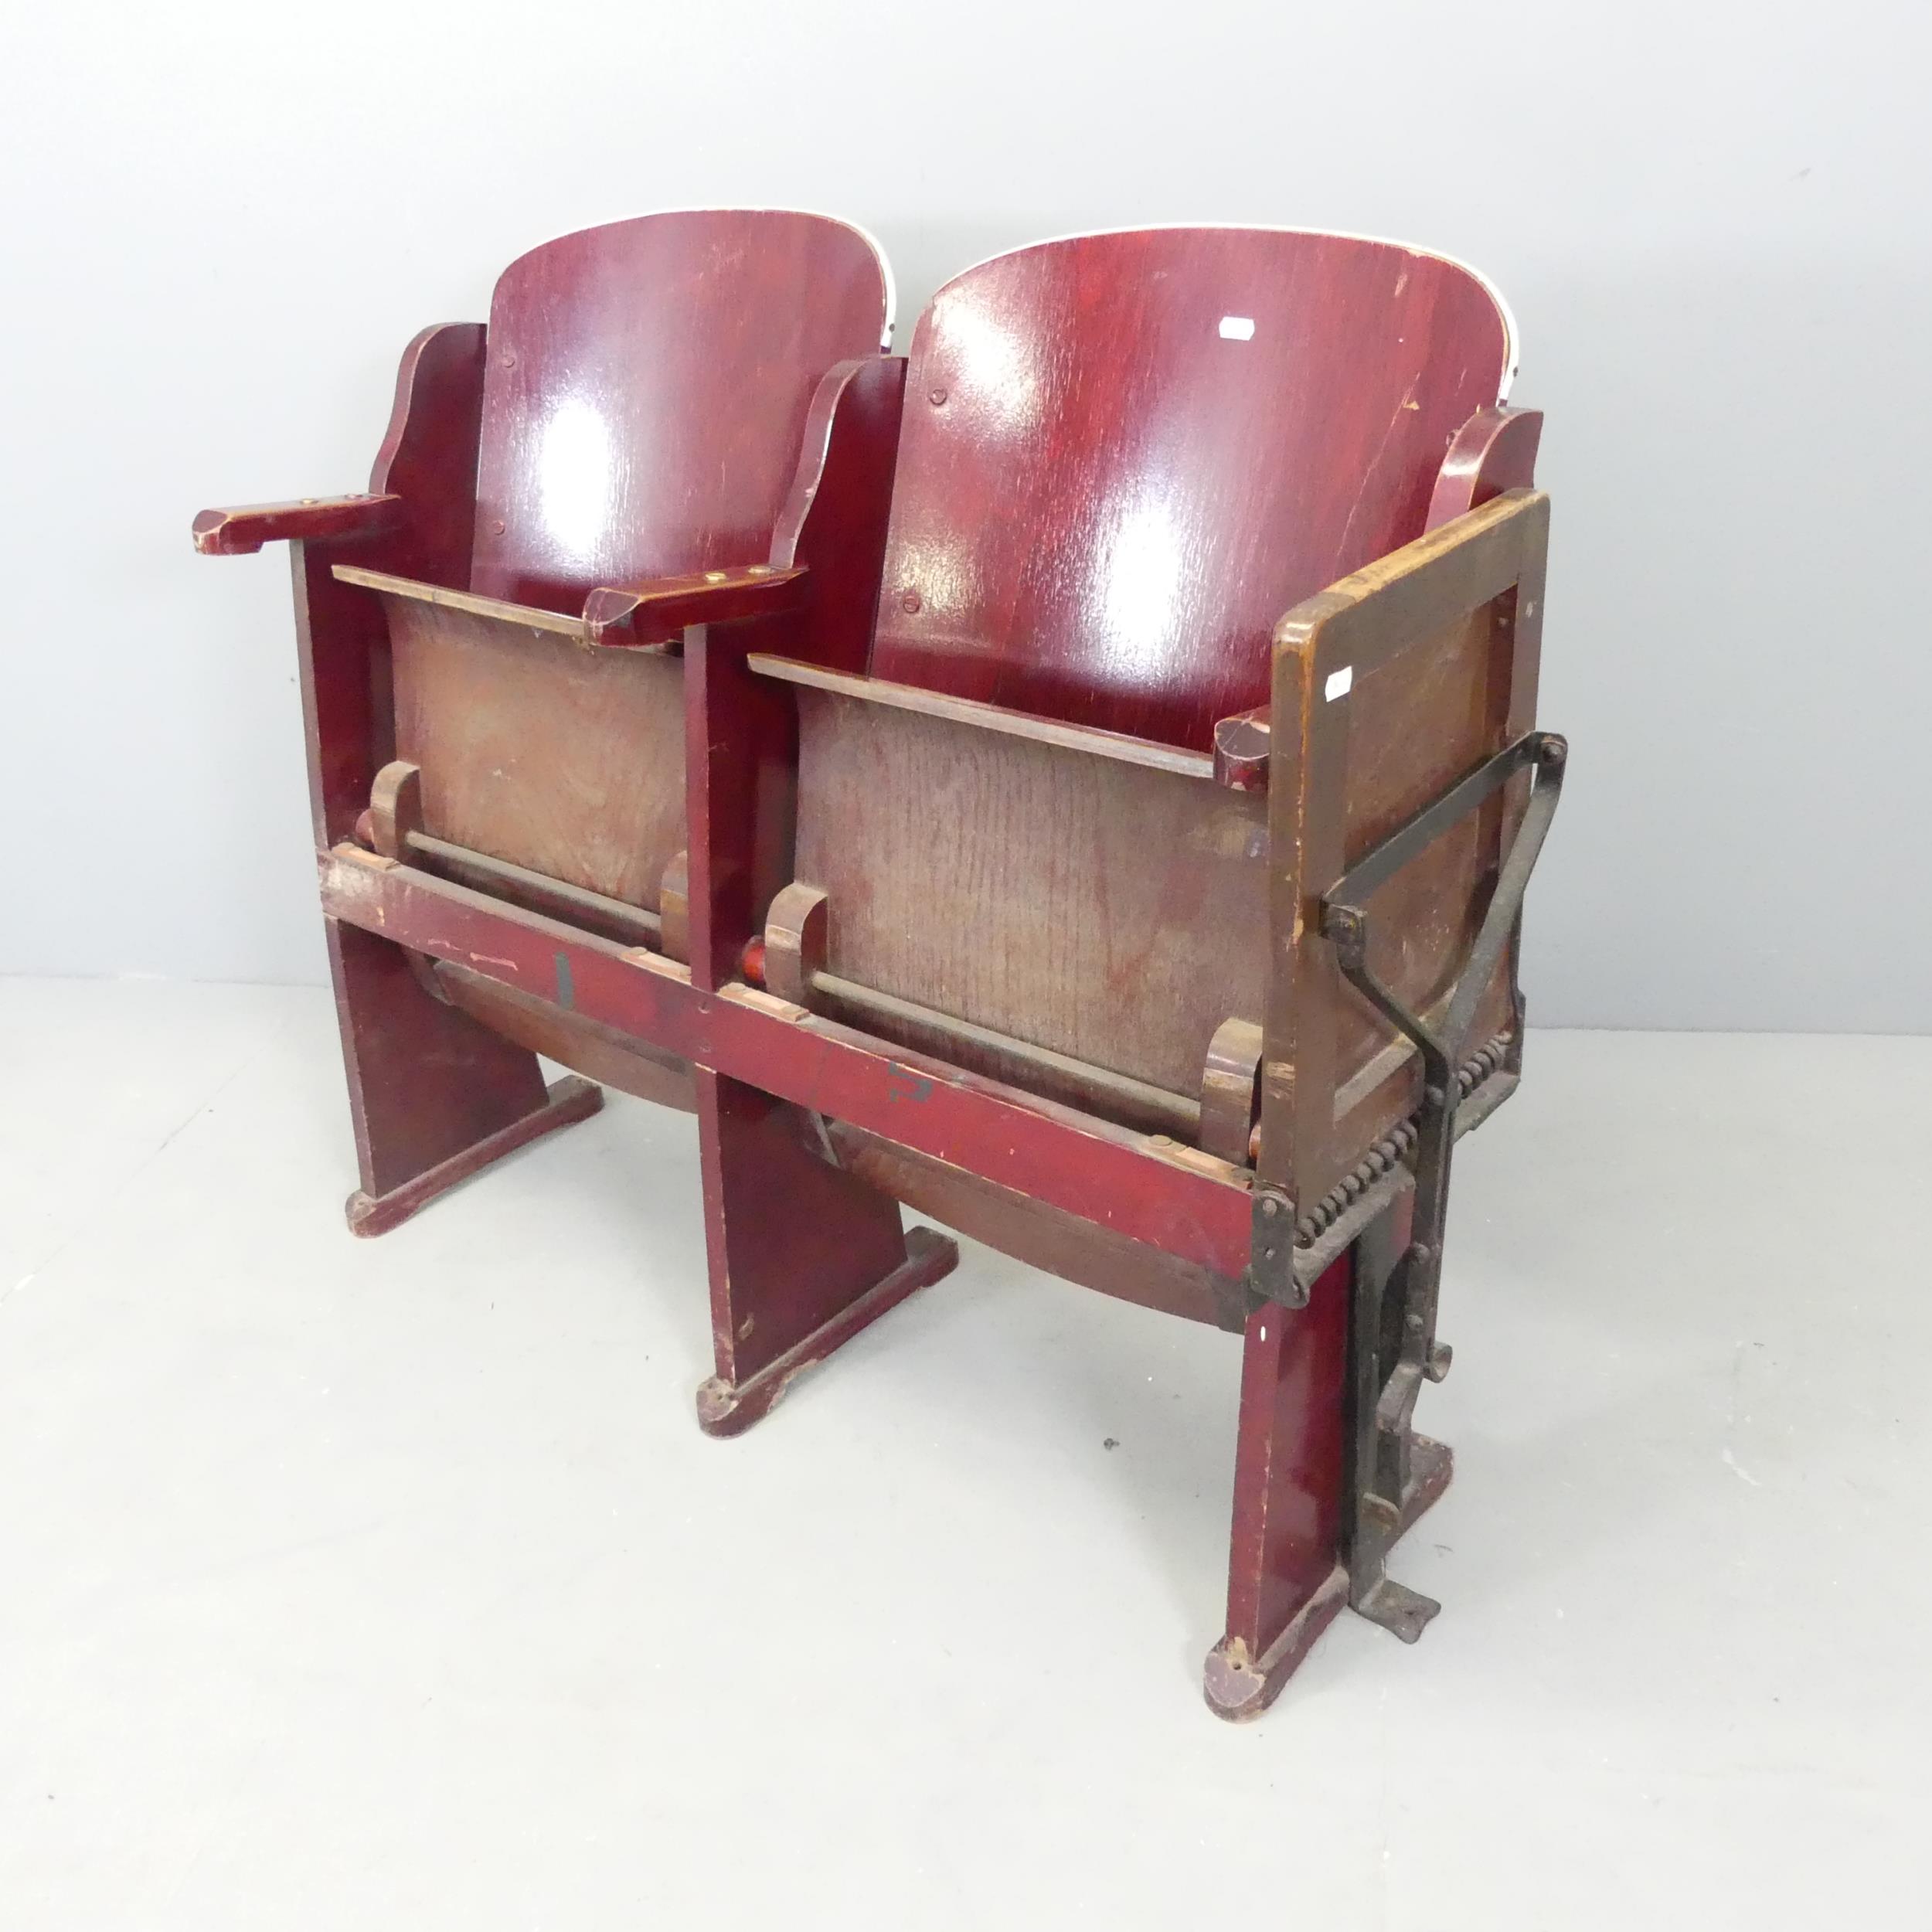 Two vintage folding cinema seats, with bent ply seats and backs. Overall (tray folded)